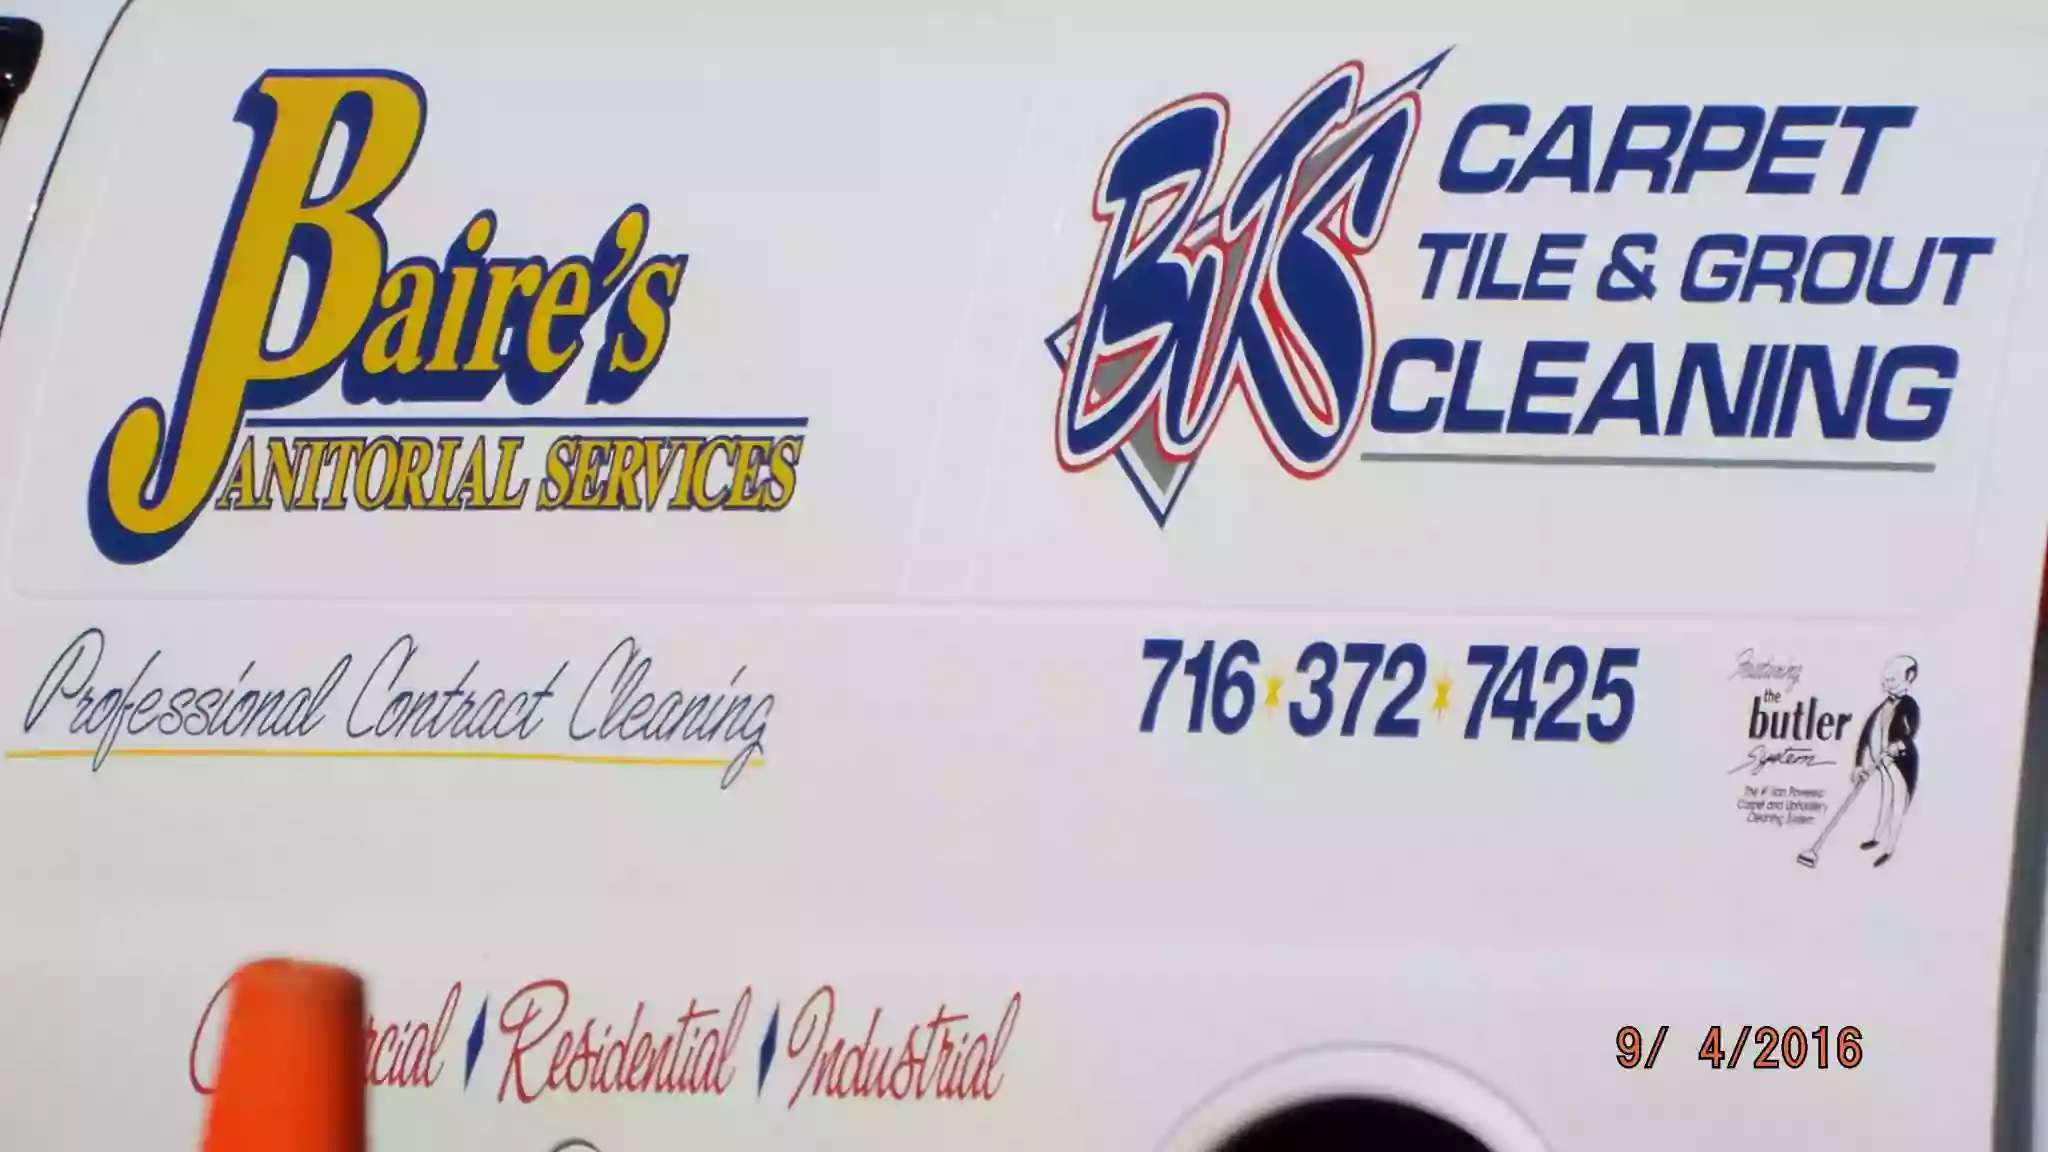 Baire's Janitorial Services